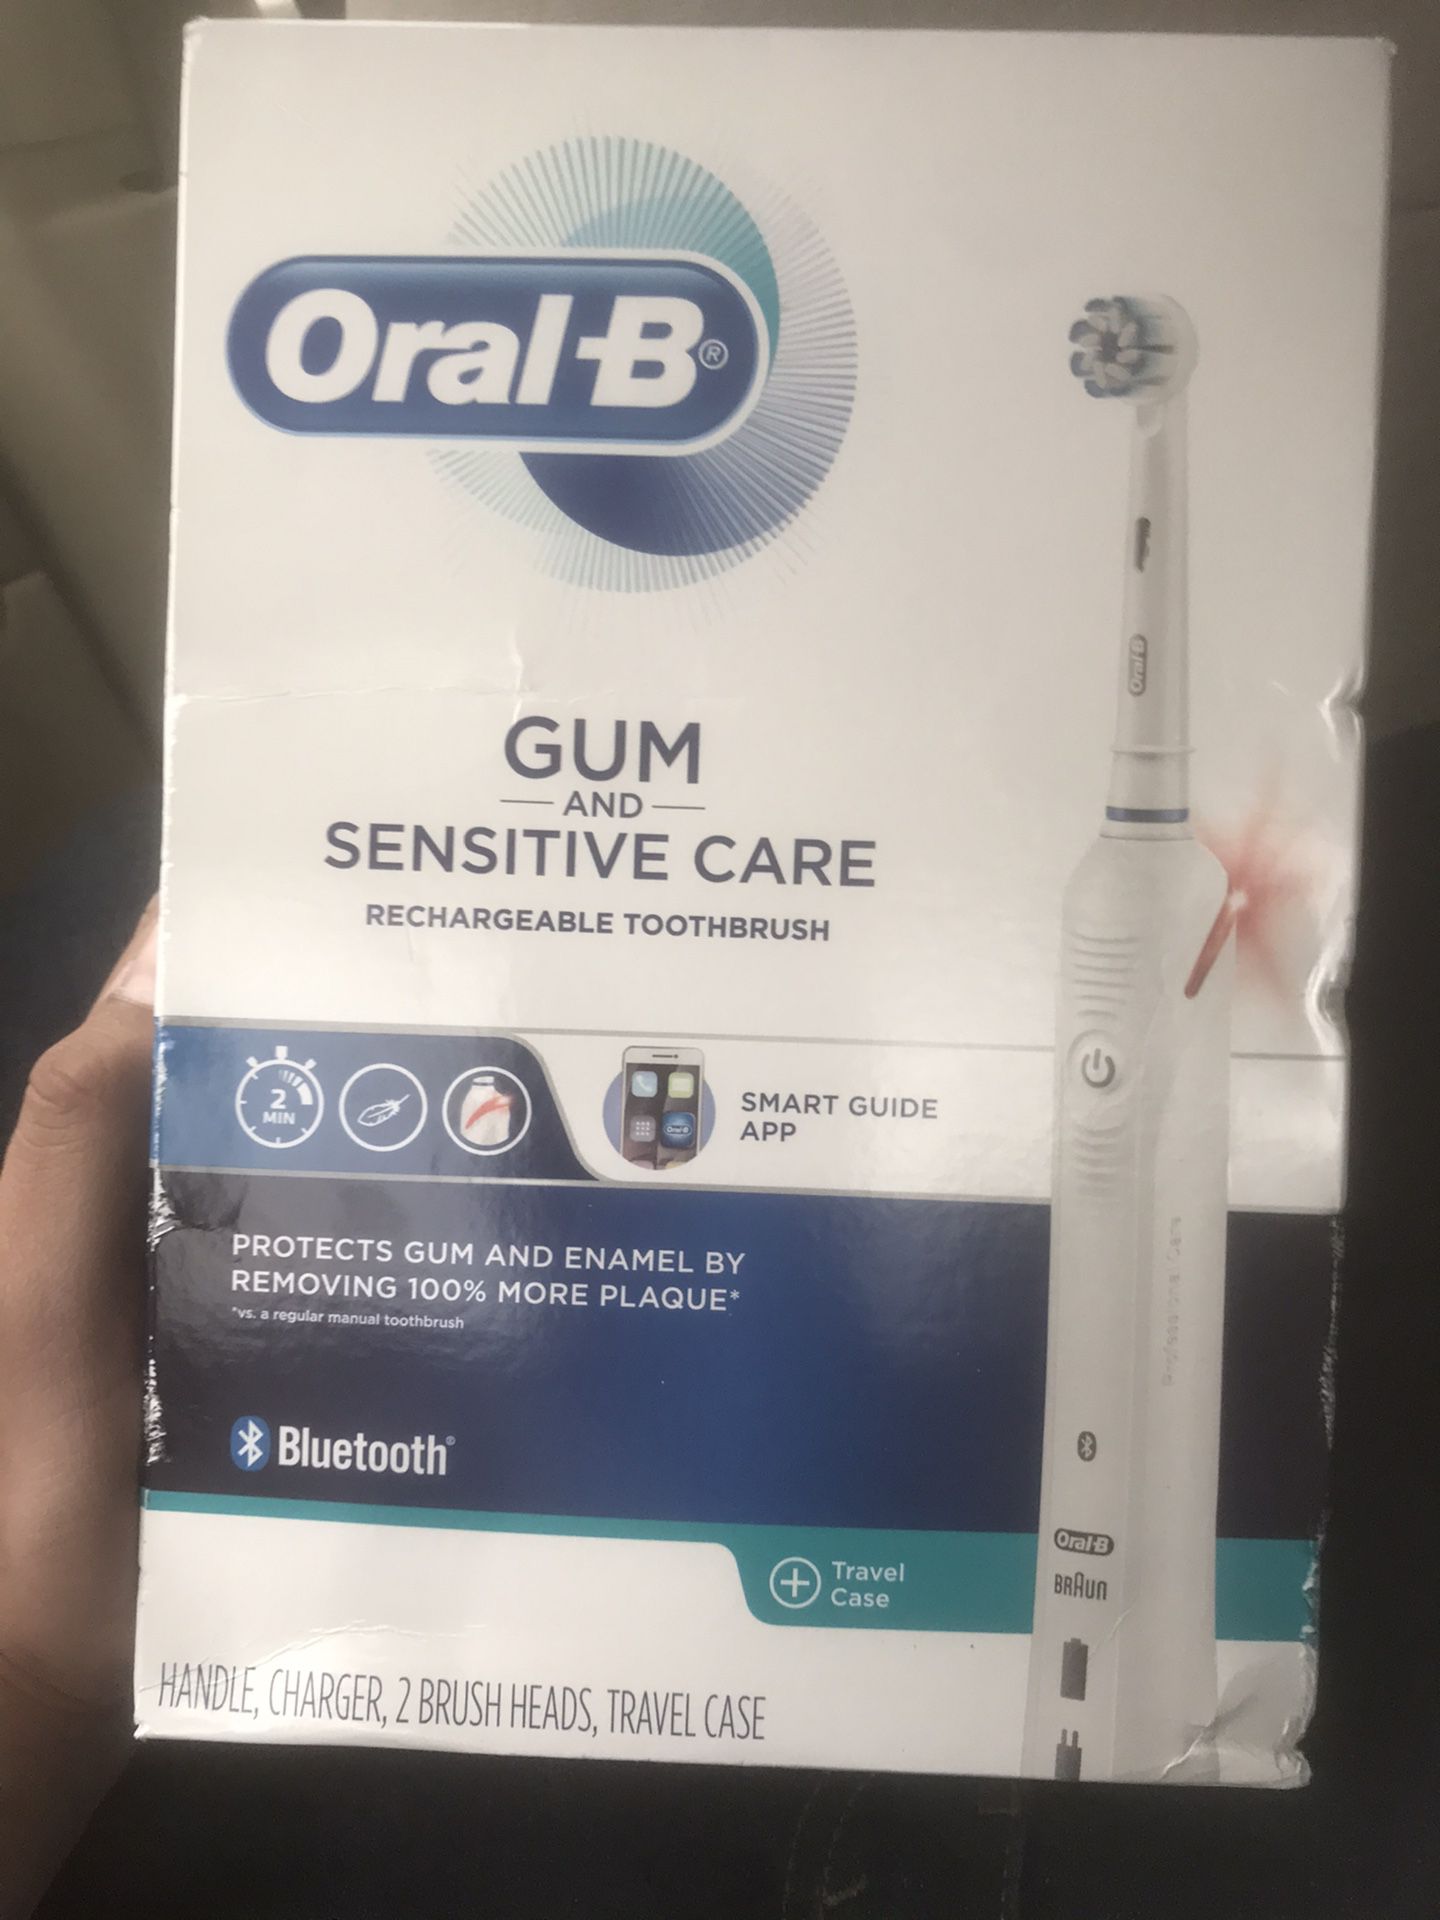 Oral B Gum And Sensitive Care Rechargeable Toothbrush